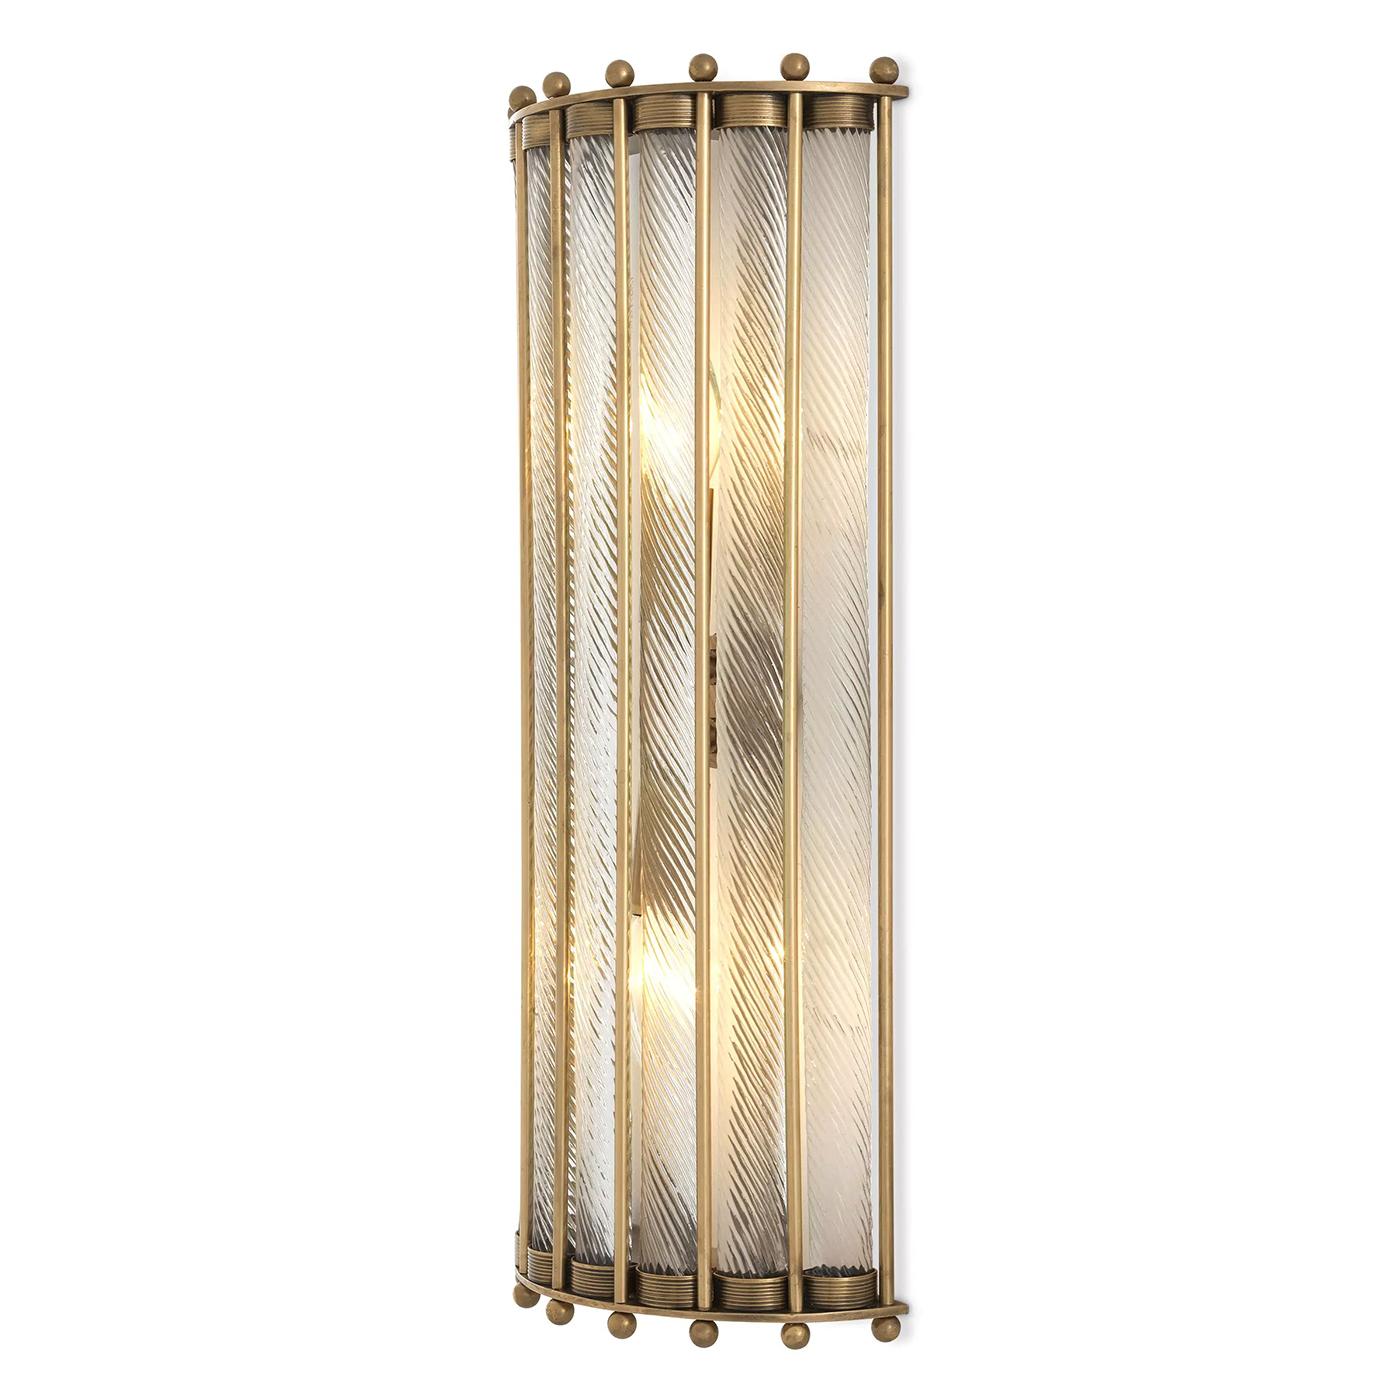 Wall Lamp Mezzo Single with solid brass structure in
Antique finish. With clear glass. 2 bulbs, lamp holder
type E14, 25 watt, 220-240 volt. Bulbs not included.
Dimmable, dimmer not included.